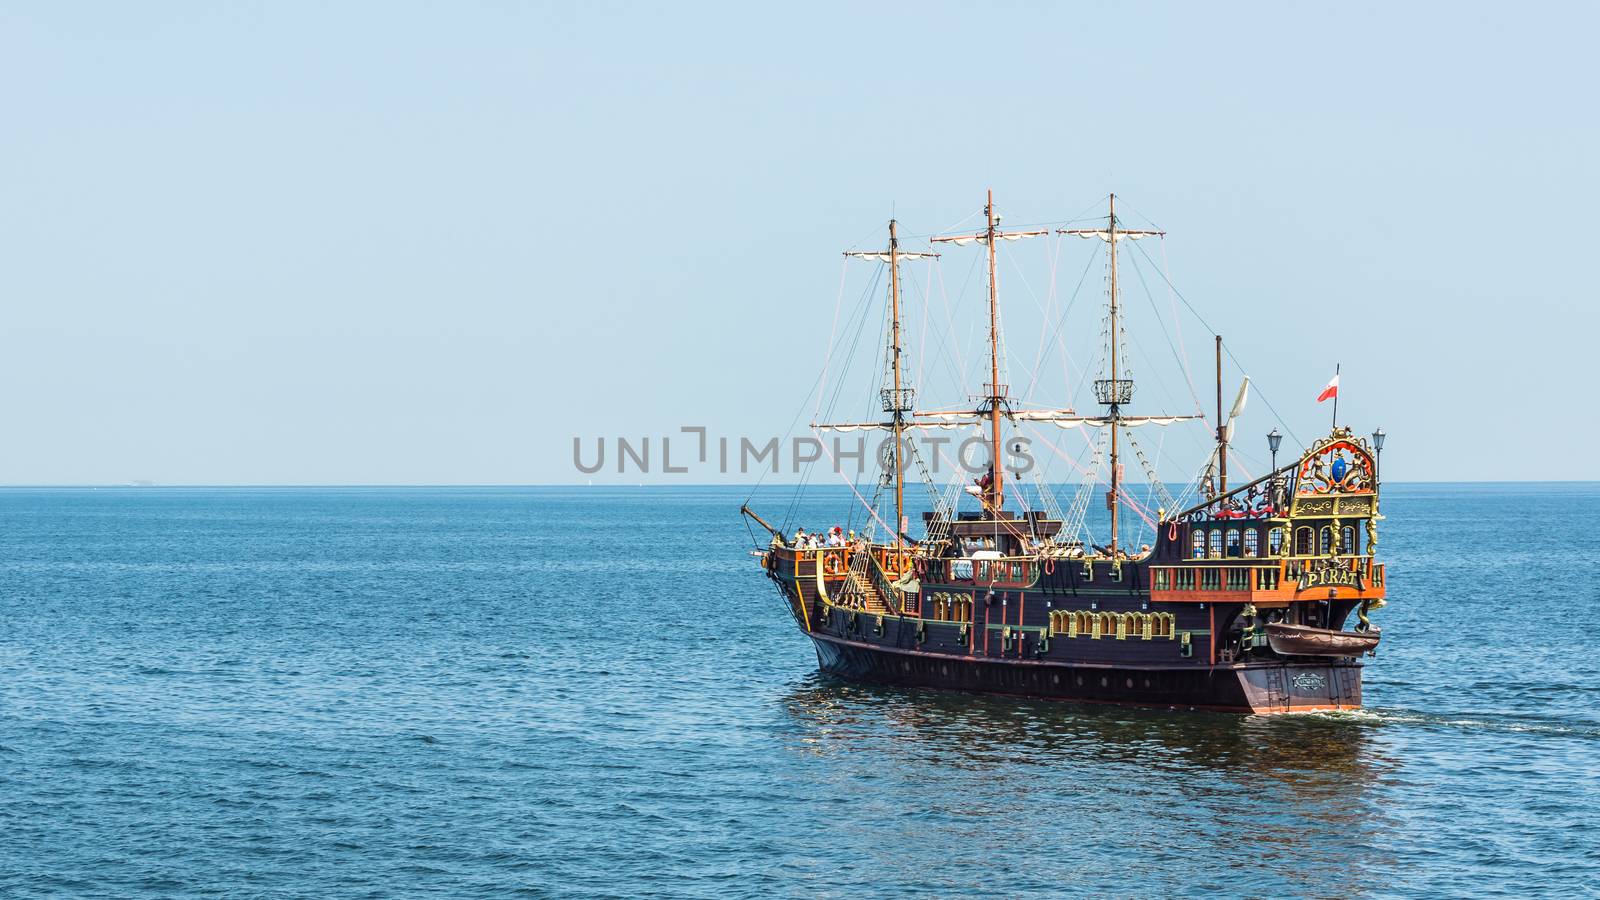 Pleasure boat, designed in old pirate frigate style, by the pier in Sopot. Pleasure cruises are one of the most popular summer attractions in the resort.